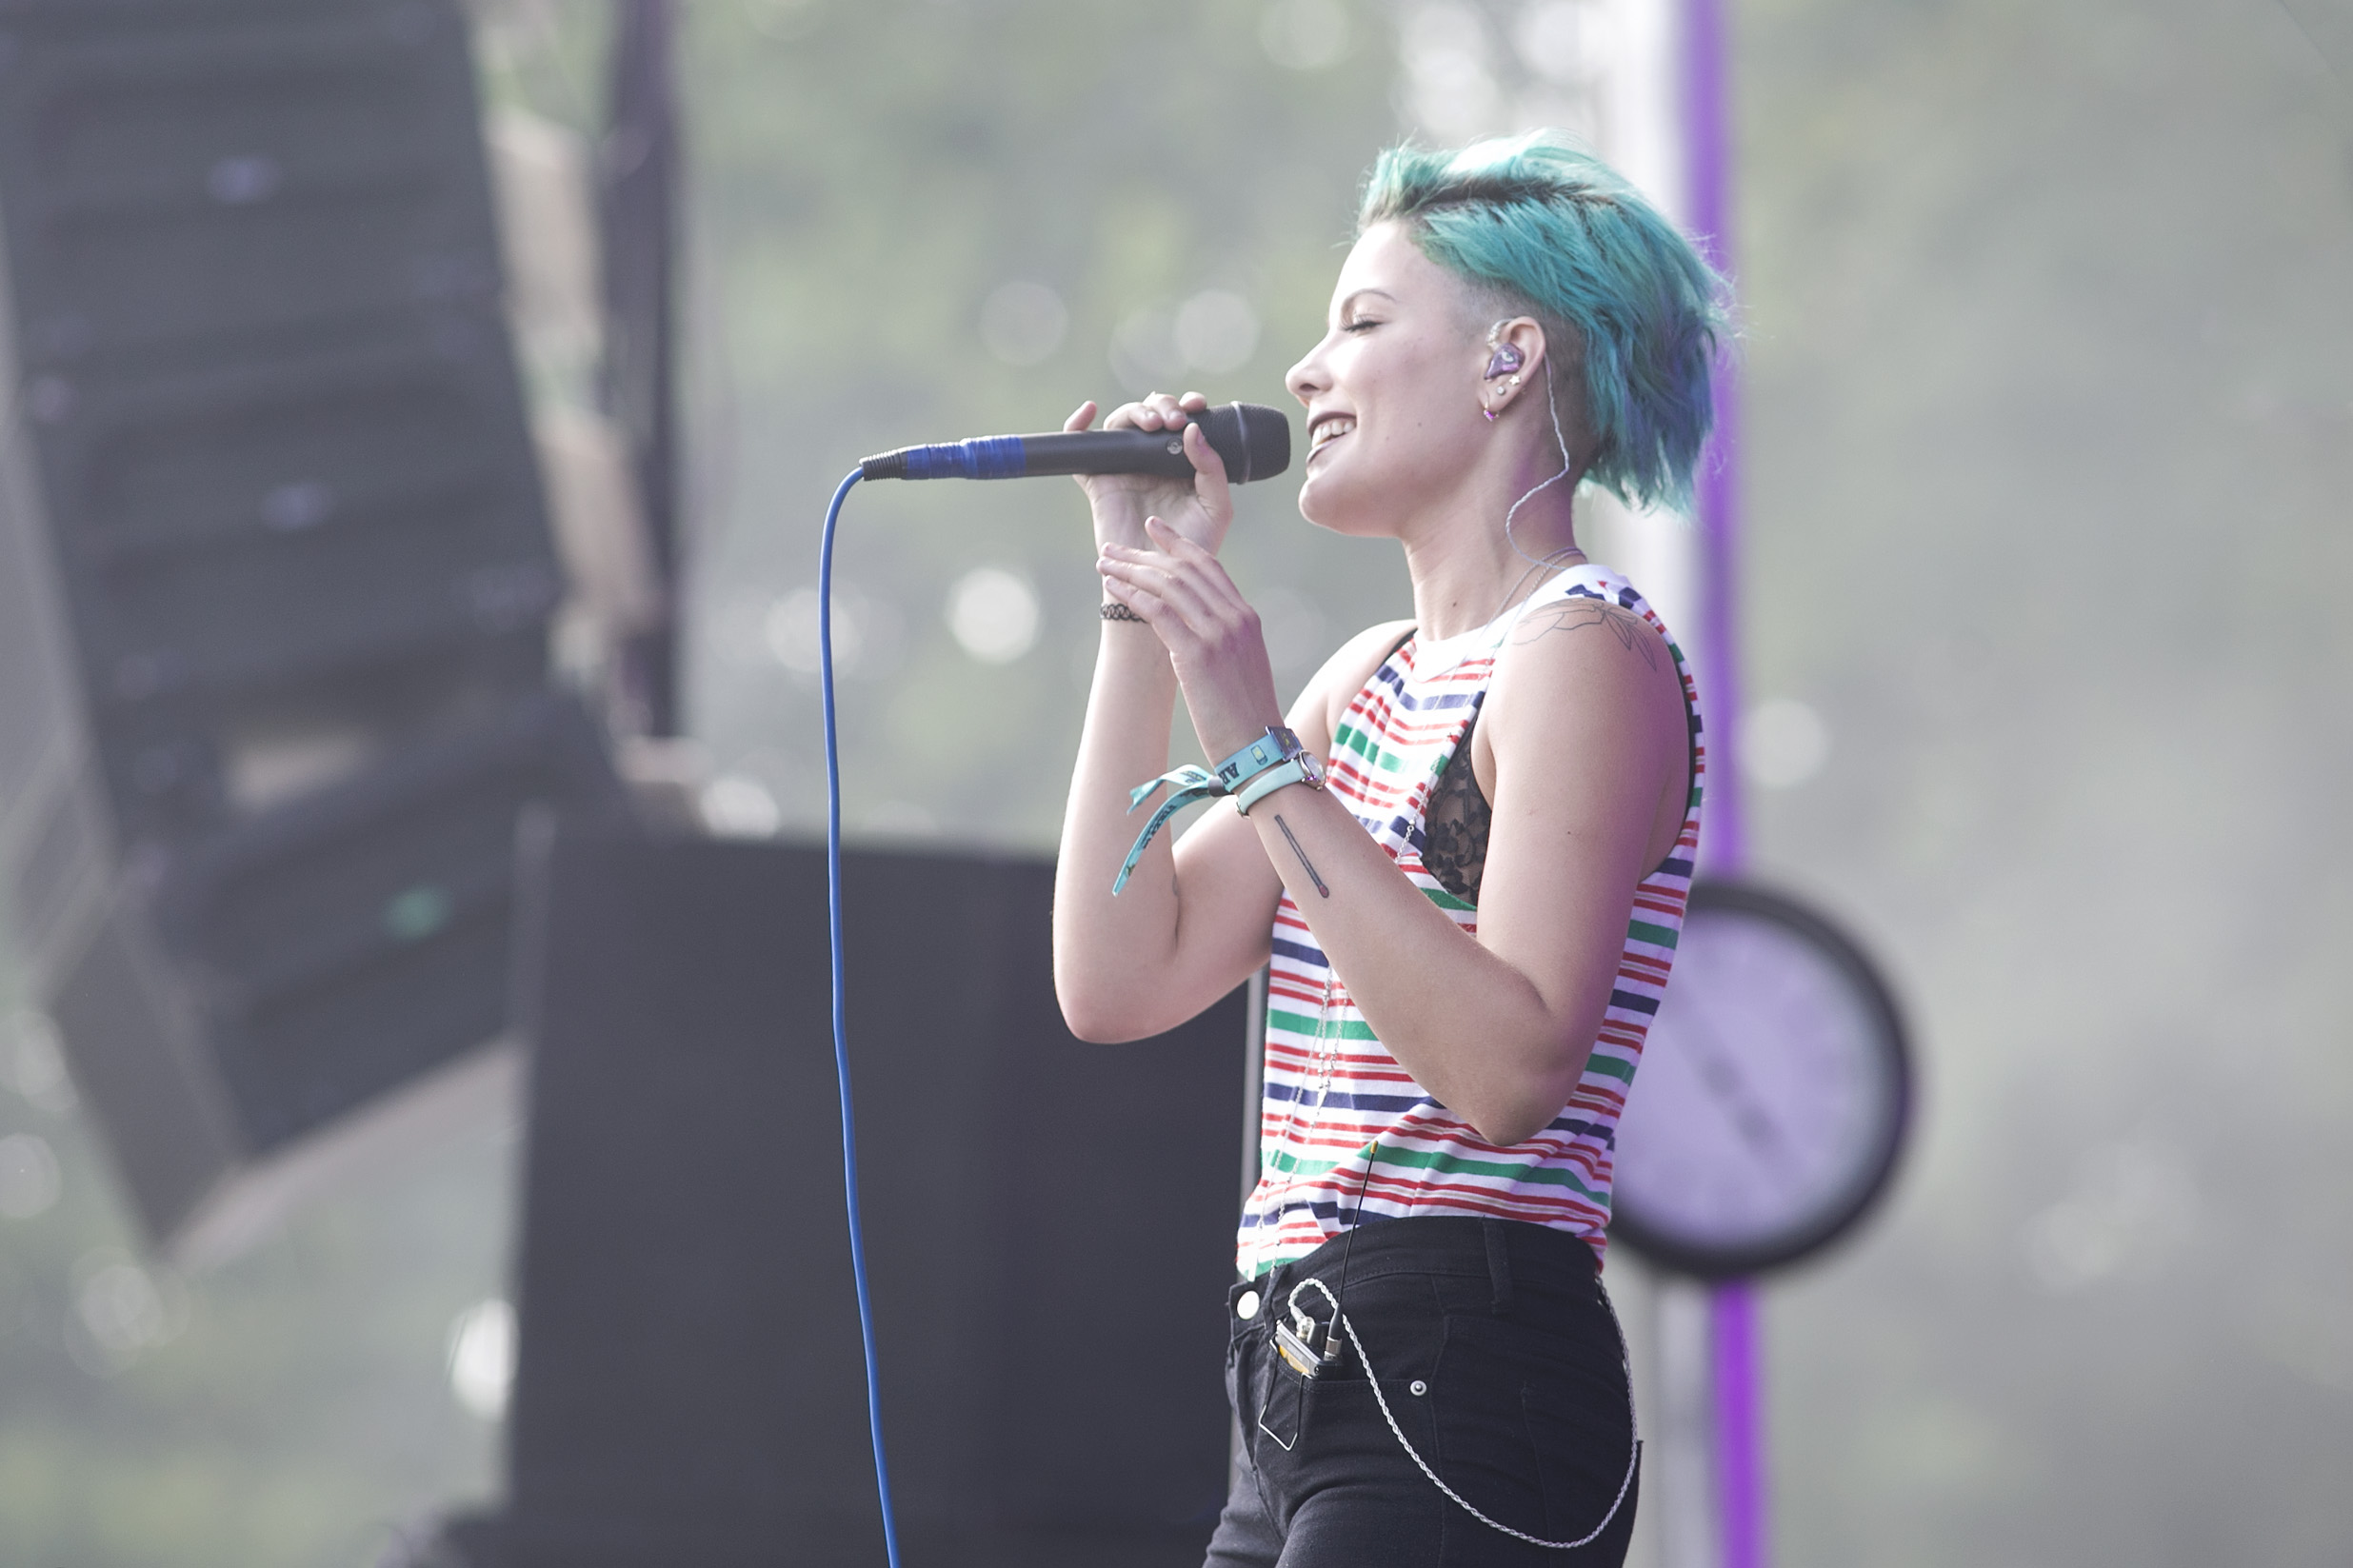 Halsey wallpaper  pm for unfiltered version  rhalsey